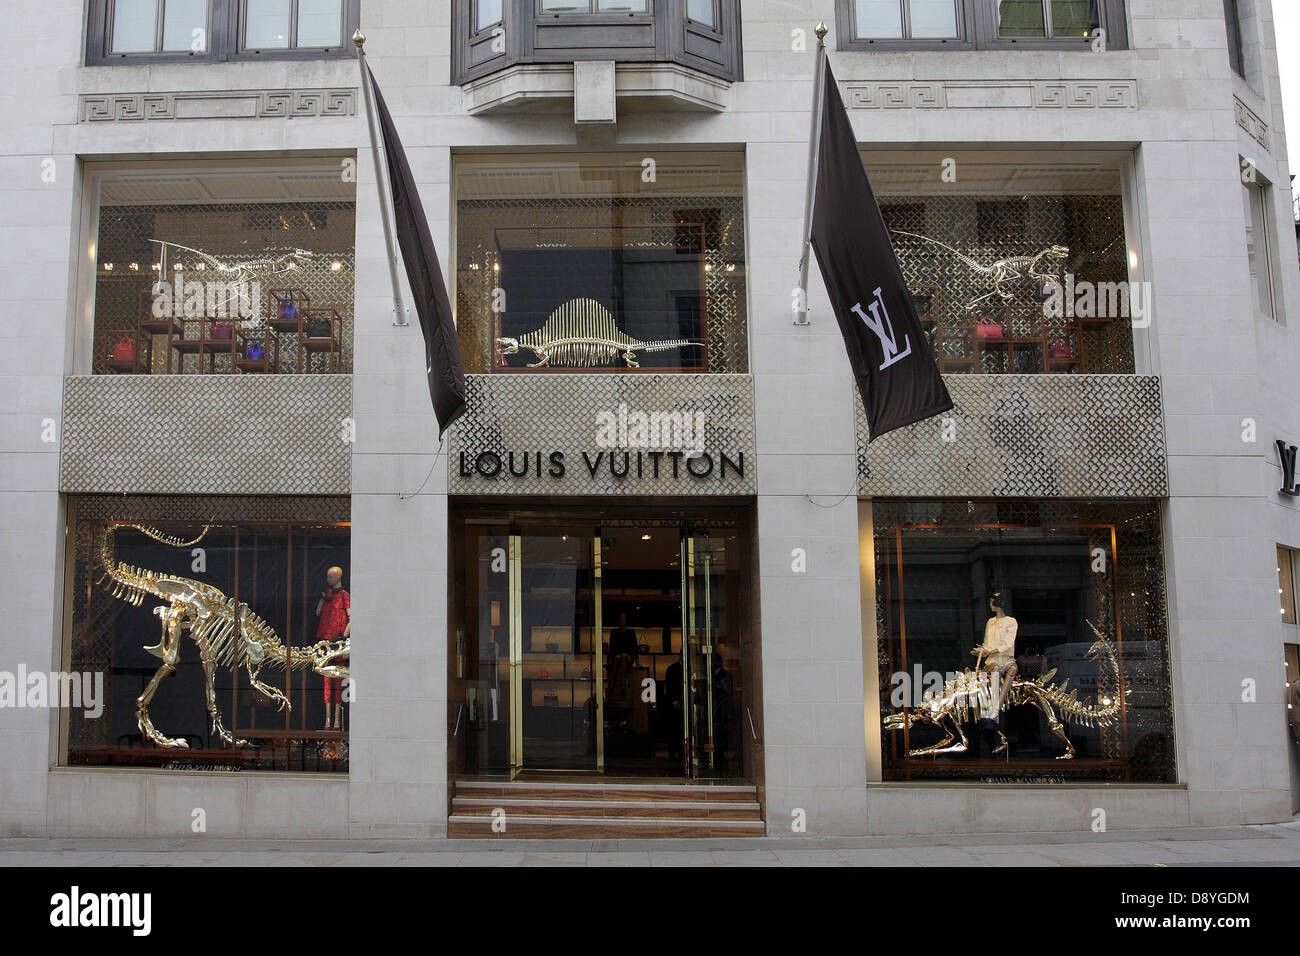 Front facade of Louis Vuitton Flagship store in New Bond Street